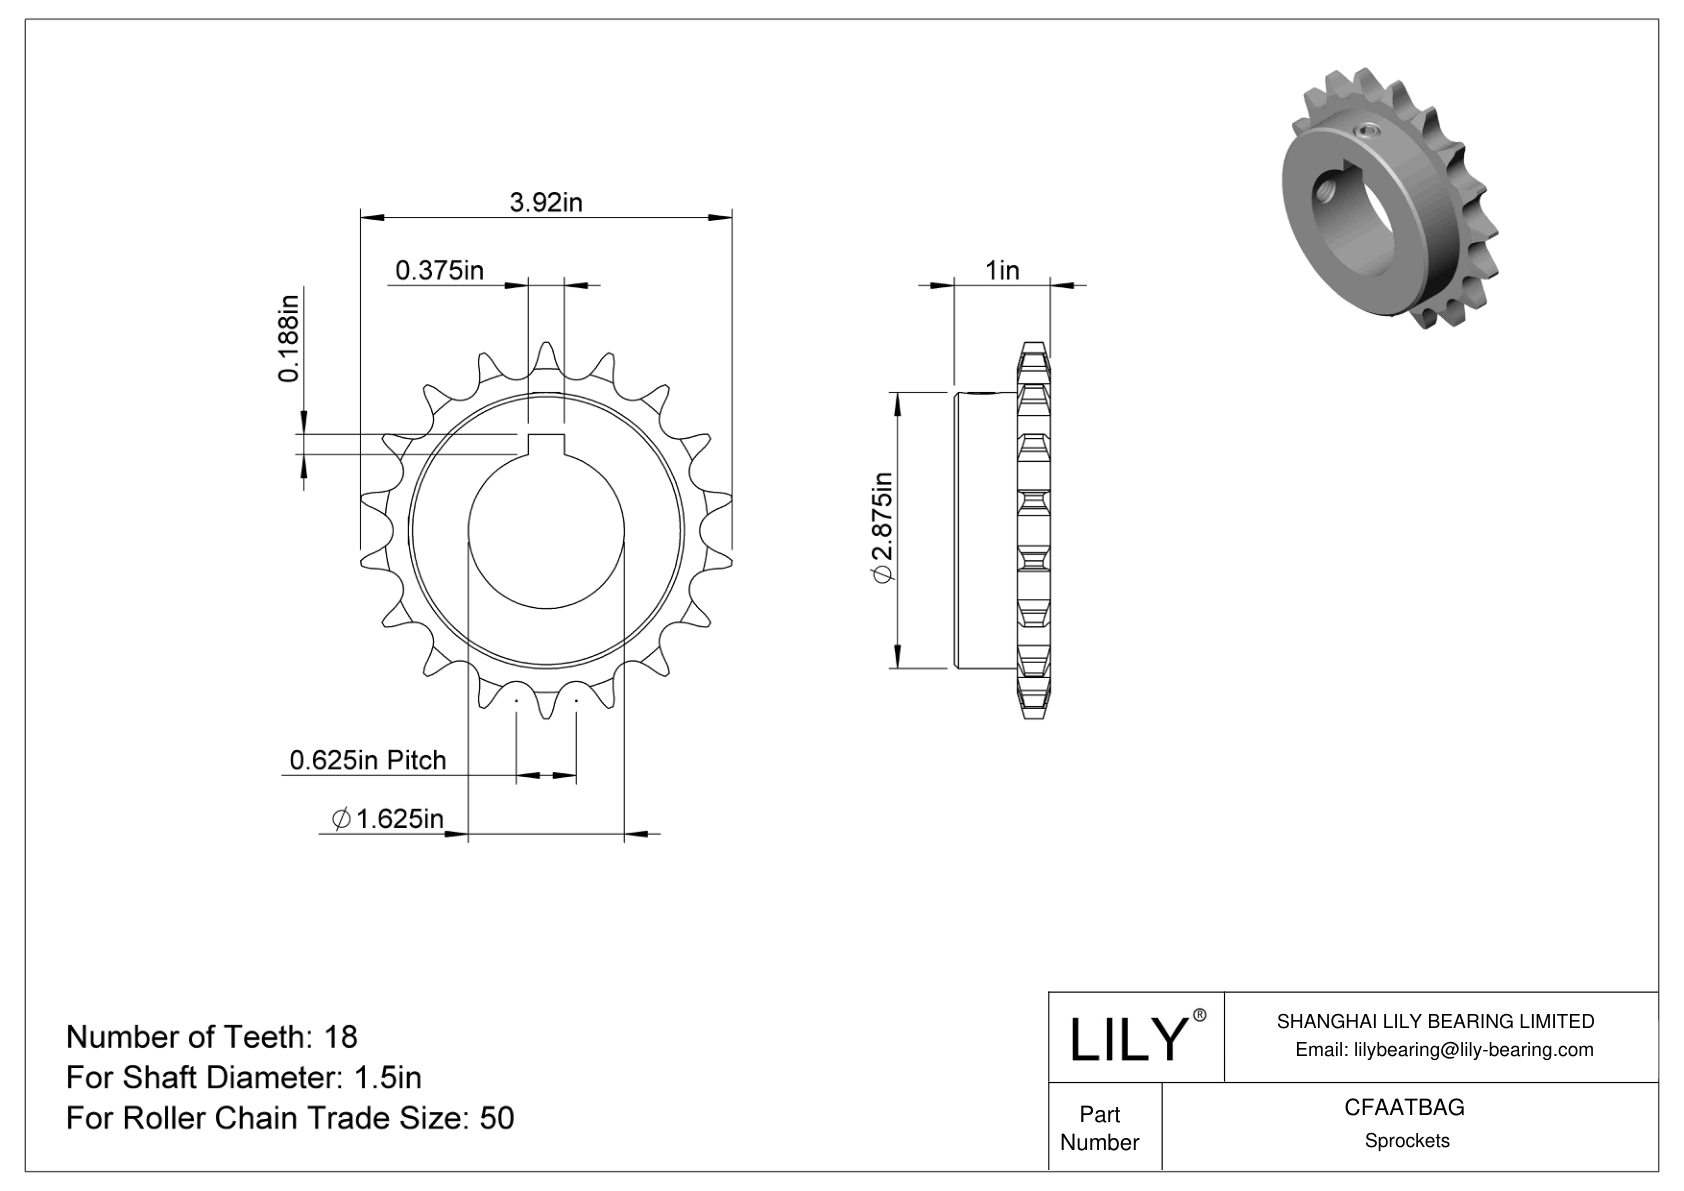 CFAATBAG Wear-Resistant Sprockets for ANSI Roller Chain cad drawing